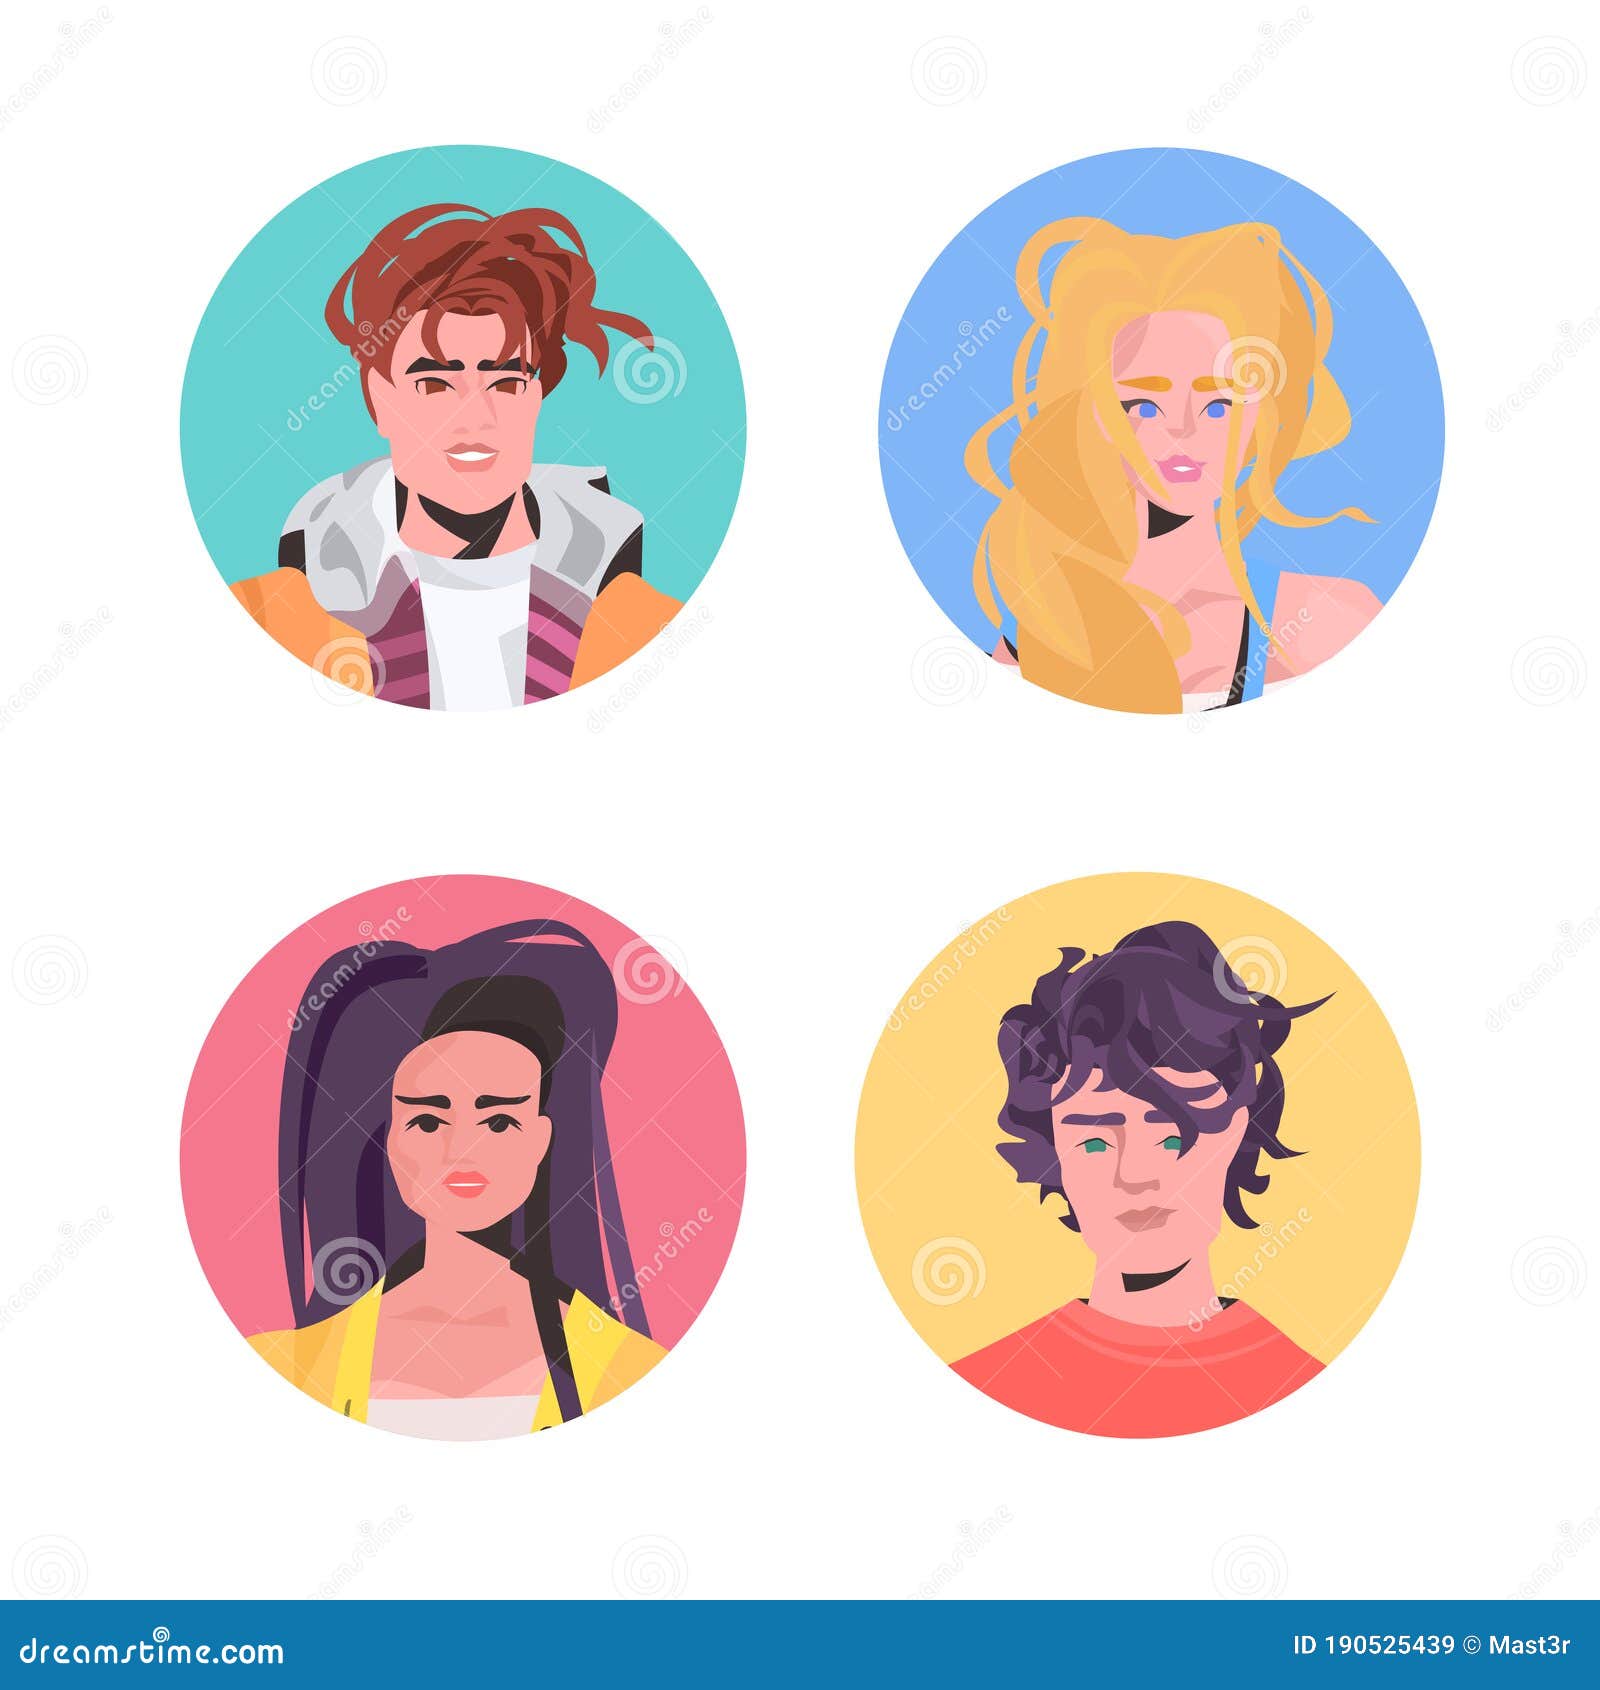 Set People Profile Avatars Beautiful Man Woman Faces Male Female Cartoon  Characters Collection Stock Vector - Illustration of adult, avatar:  190525439